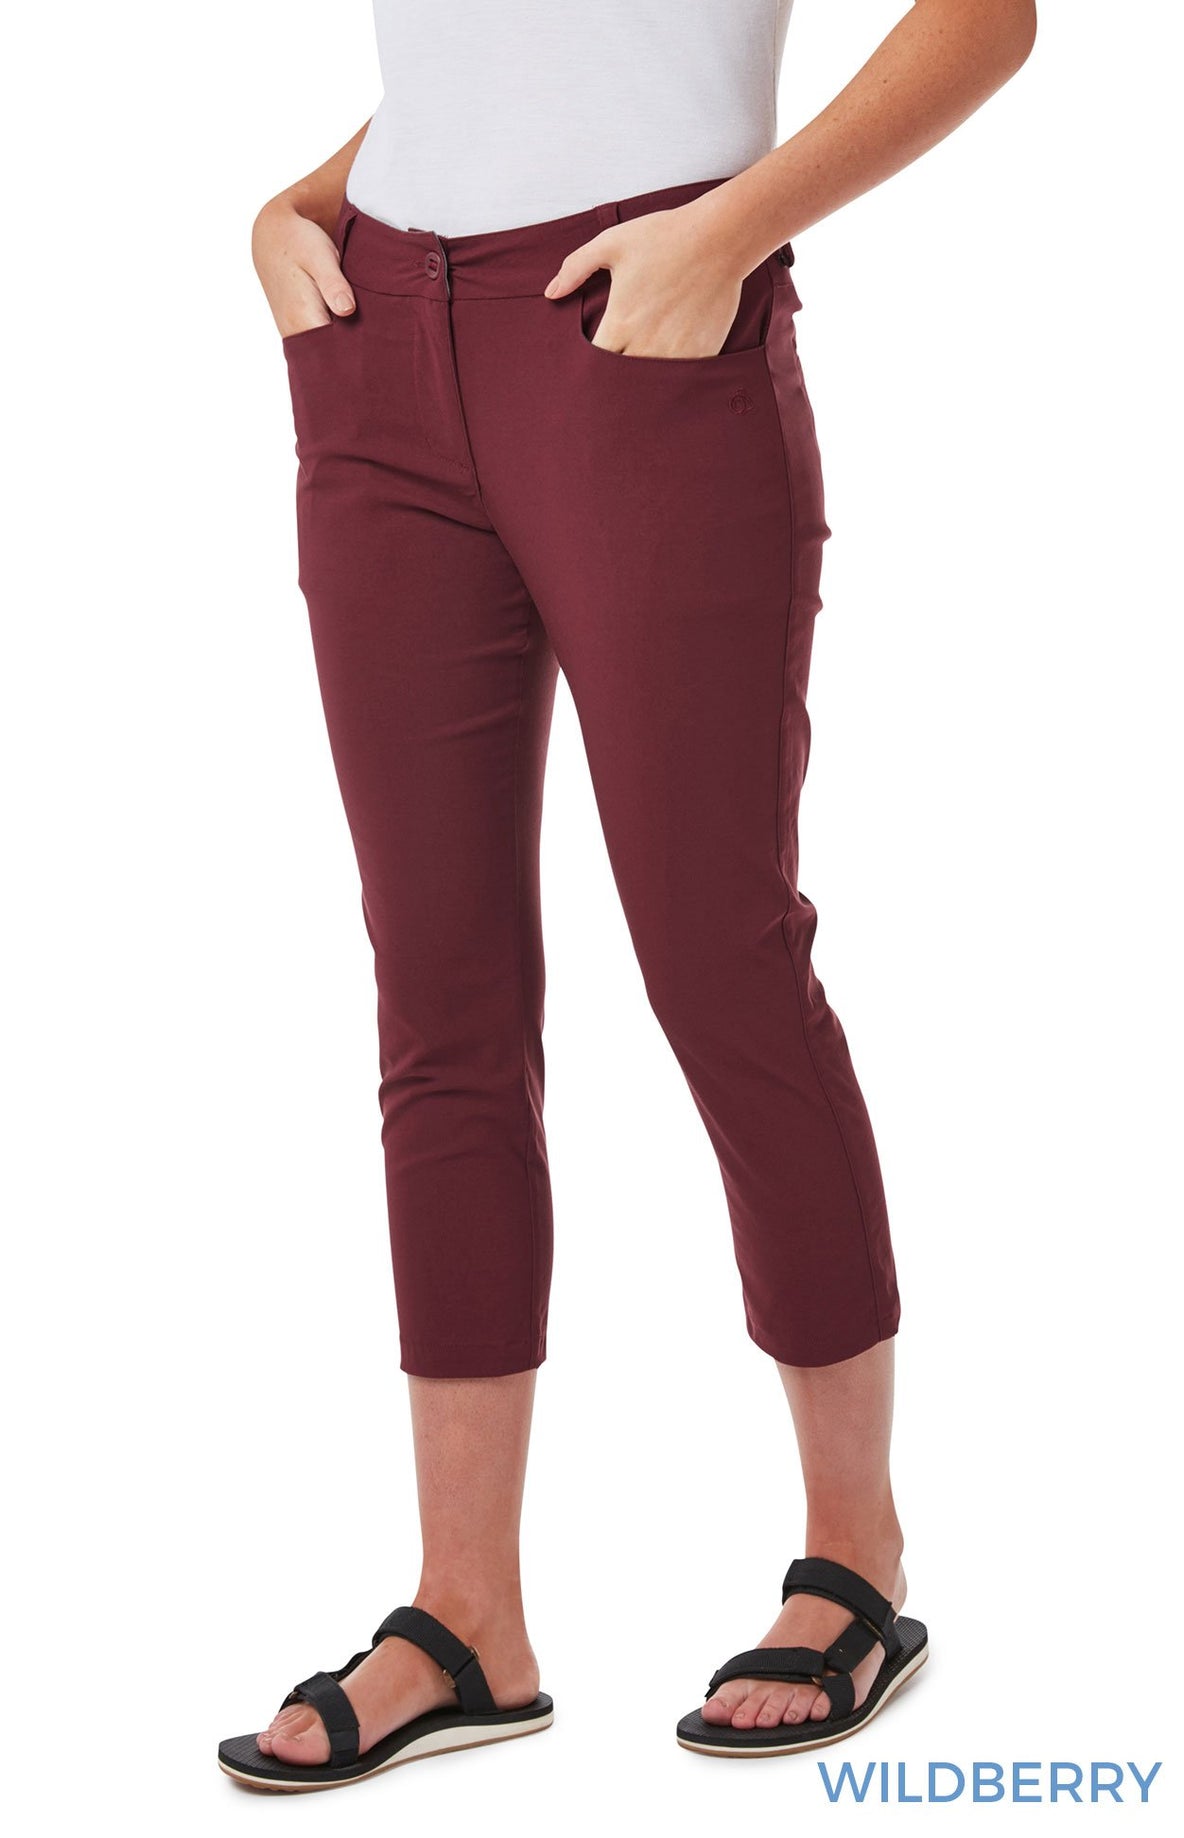 Wildberry Ladies Clara NosiLife Crop Pants by Craghoppers